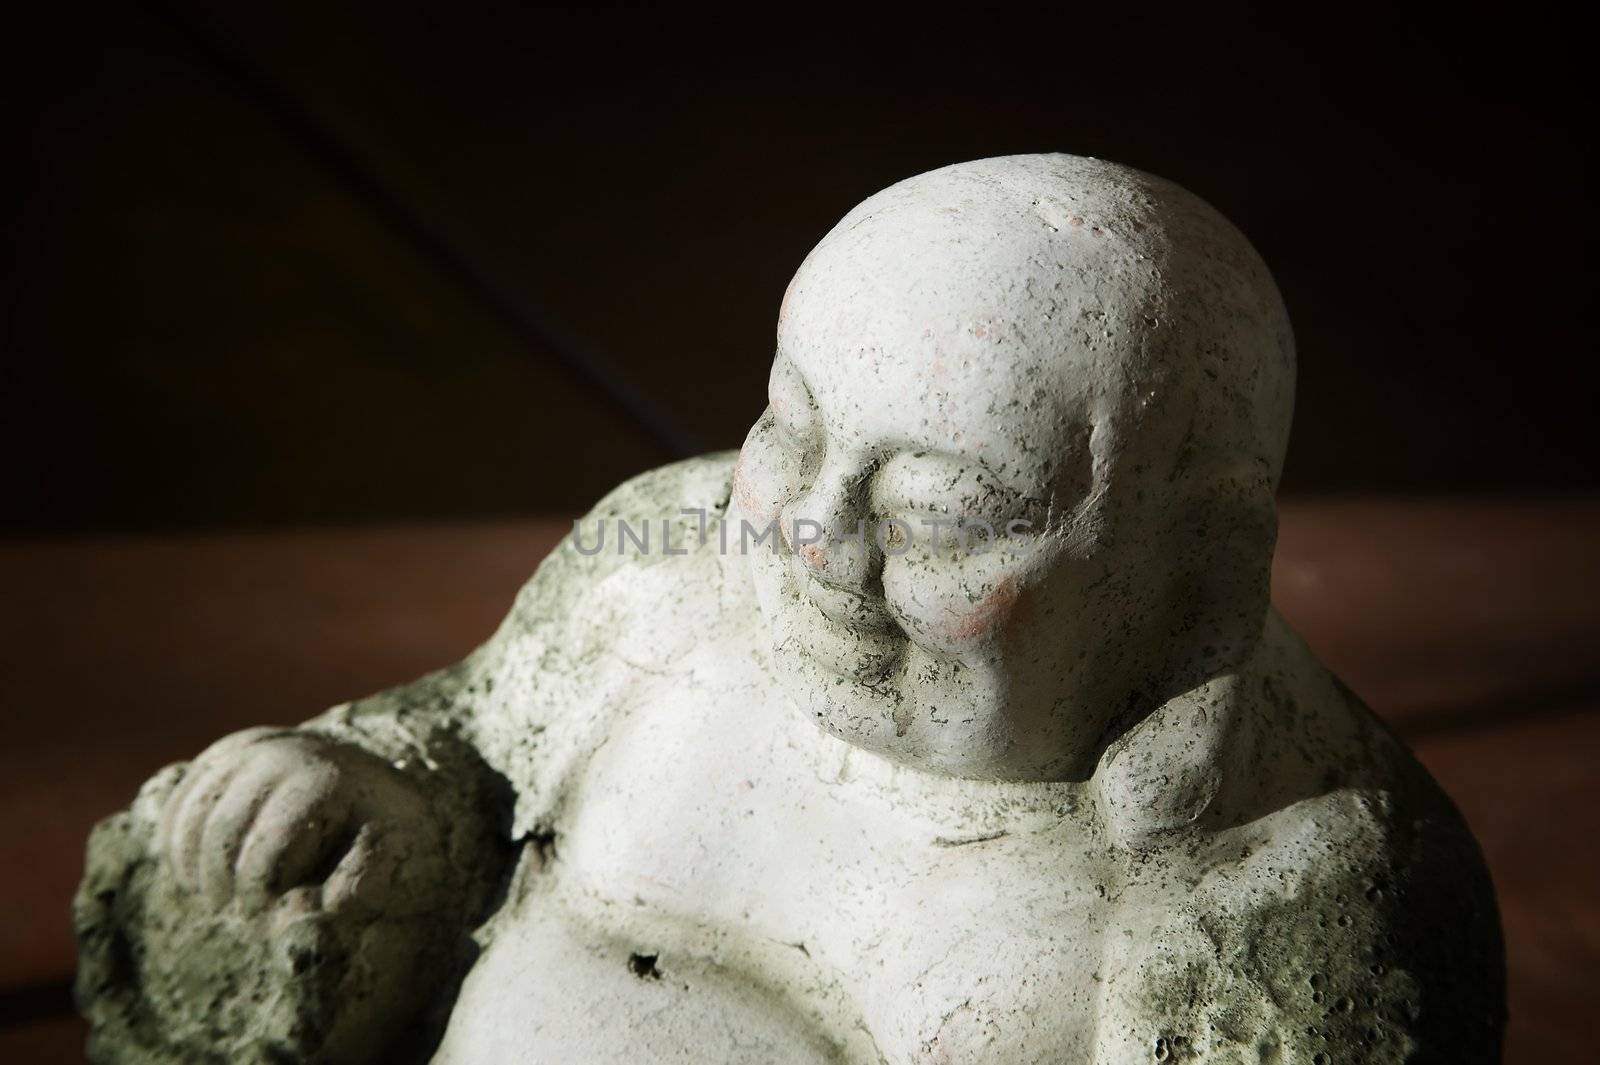 Concrete Buddha Statue in bright Afternoon Light